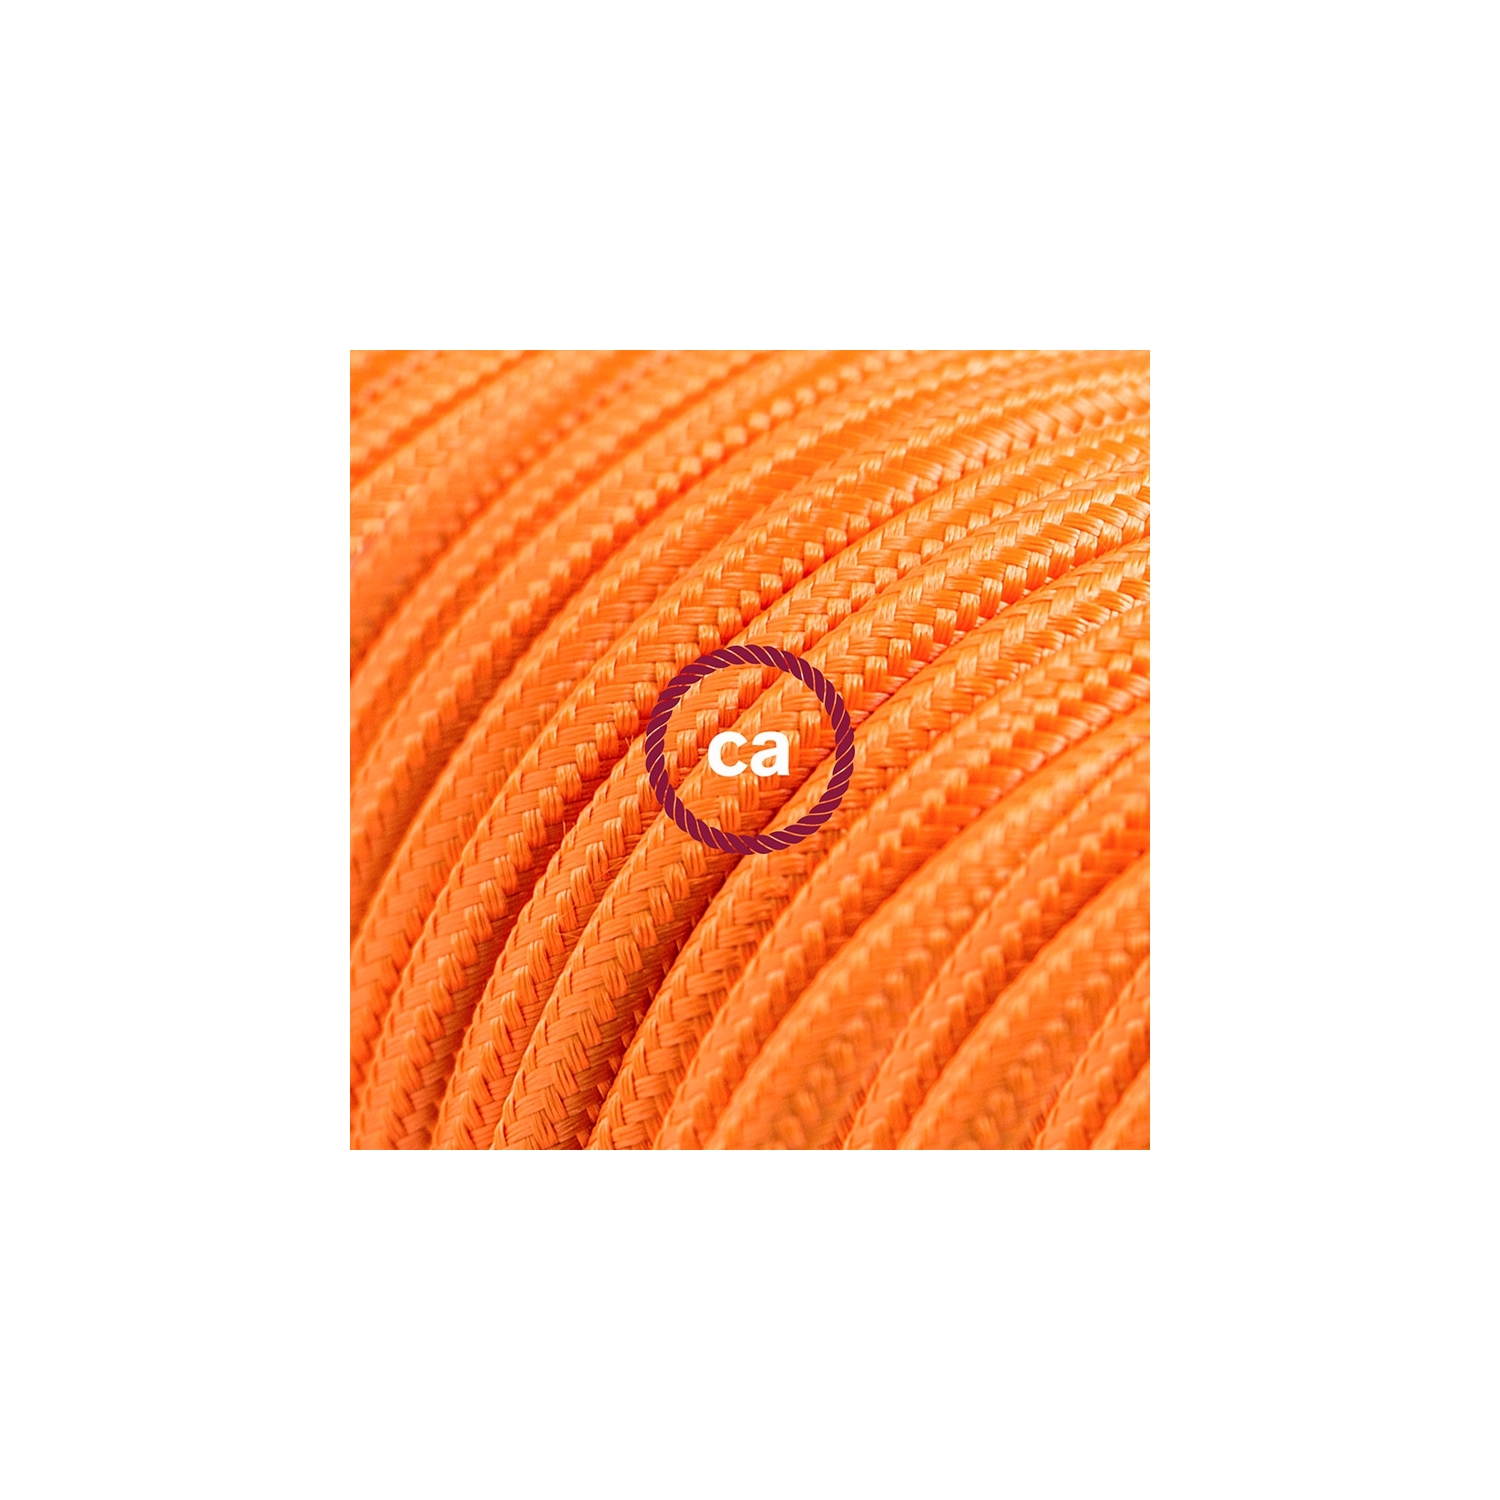 Power Cord with foot switch, RM15 Orange Rayon - Choose color of switch/plug